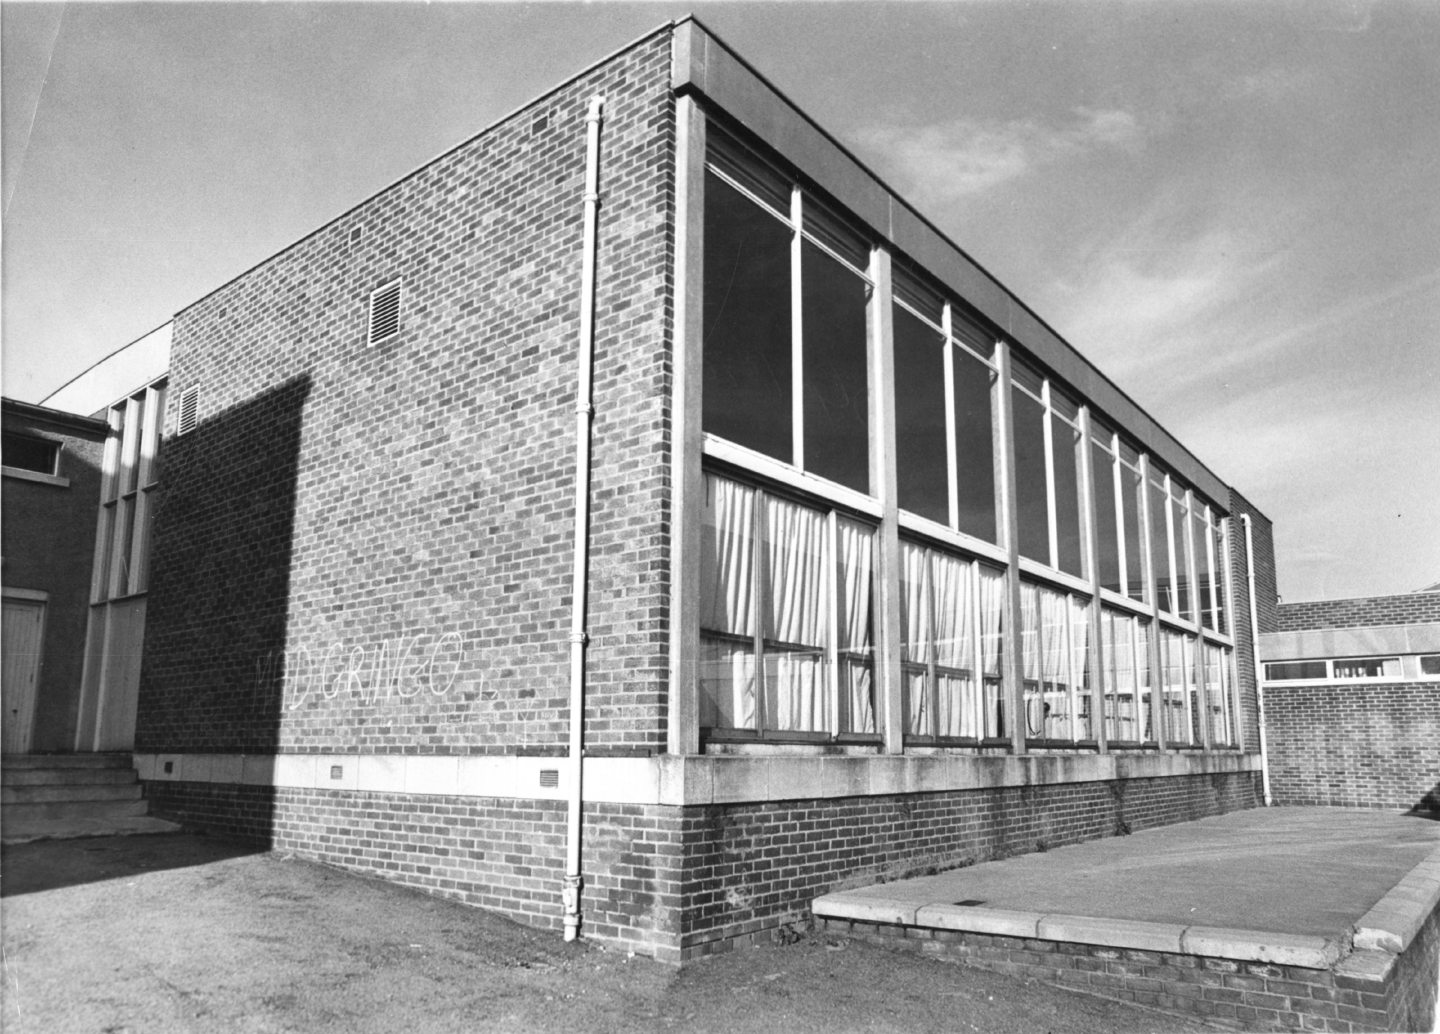 Exterior of Summerhill Academy building that housed the school's swimming pool.